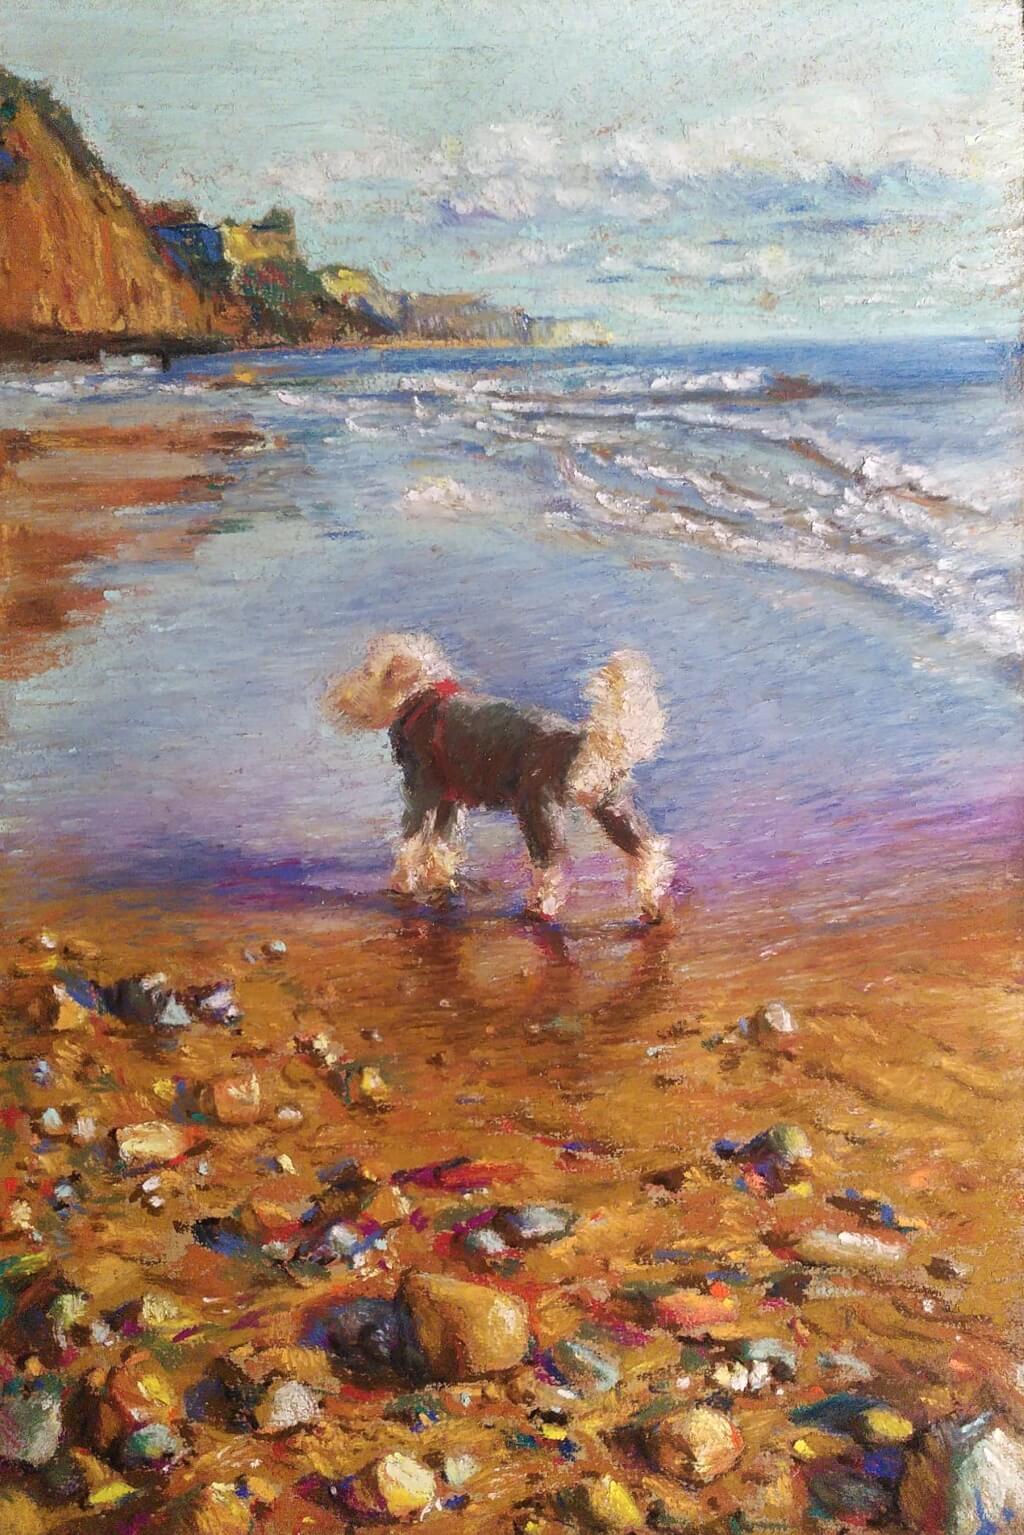 Coloured pastel drawing of a golden doodle in a grey fleece, on a sunlit beach.